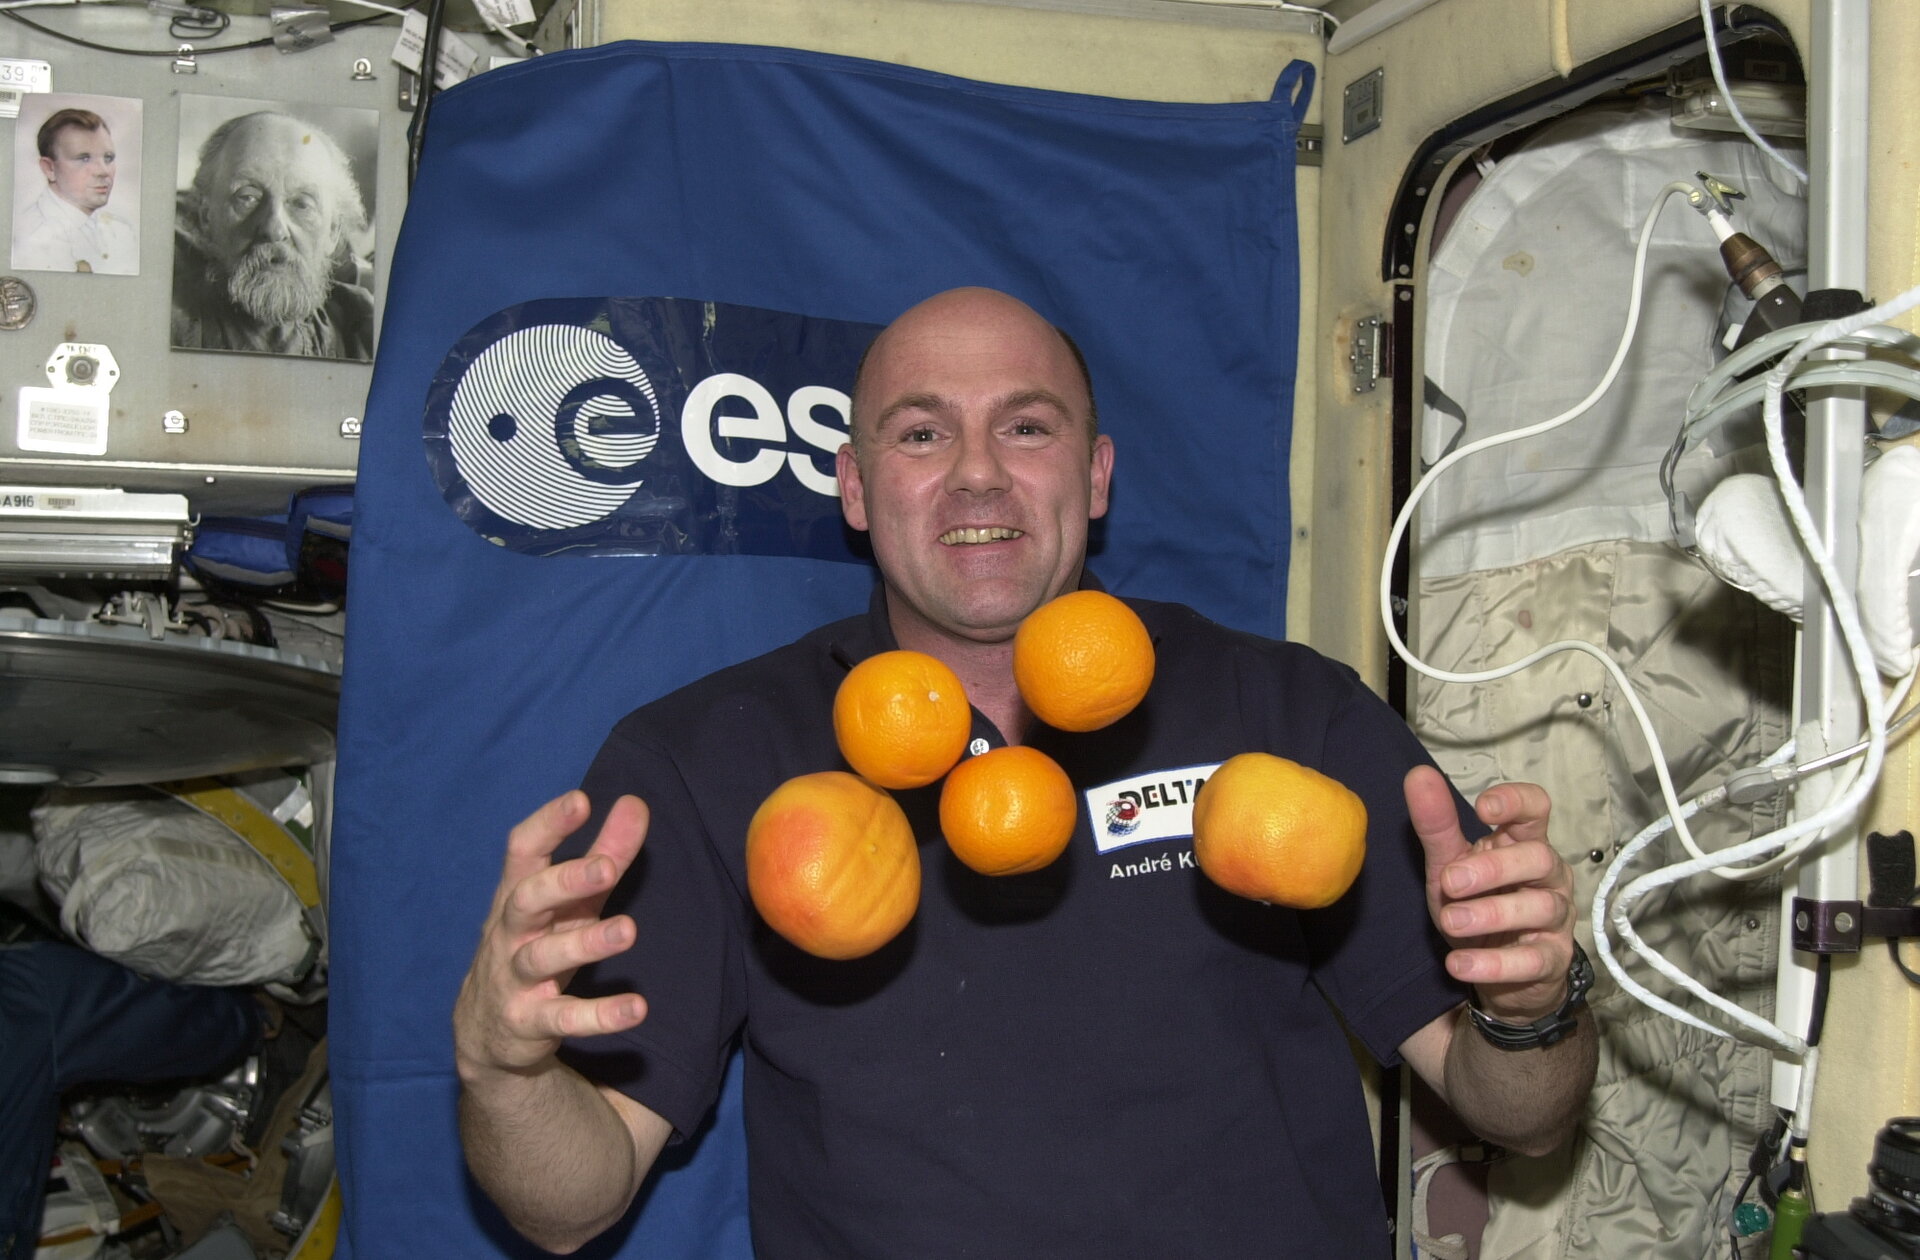 André during the Delta Mission to ISS in 2004